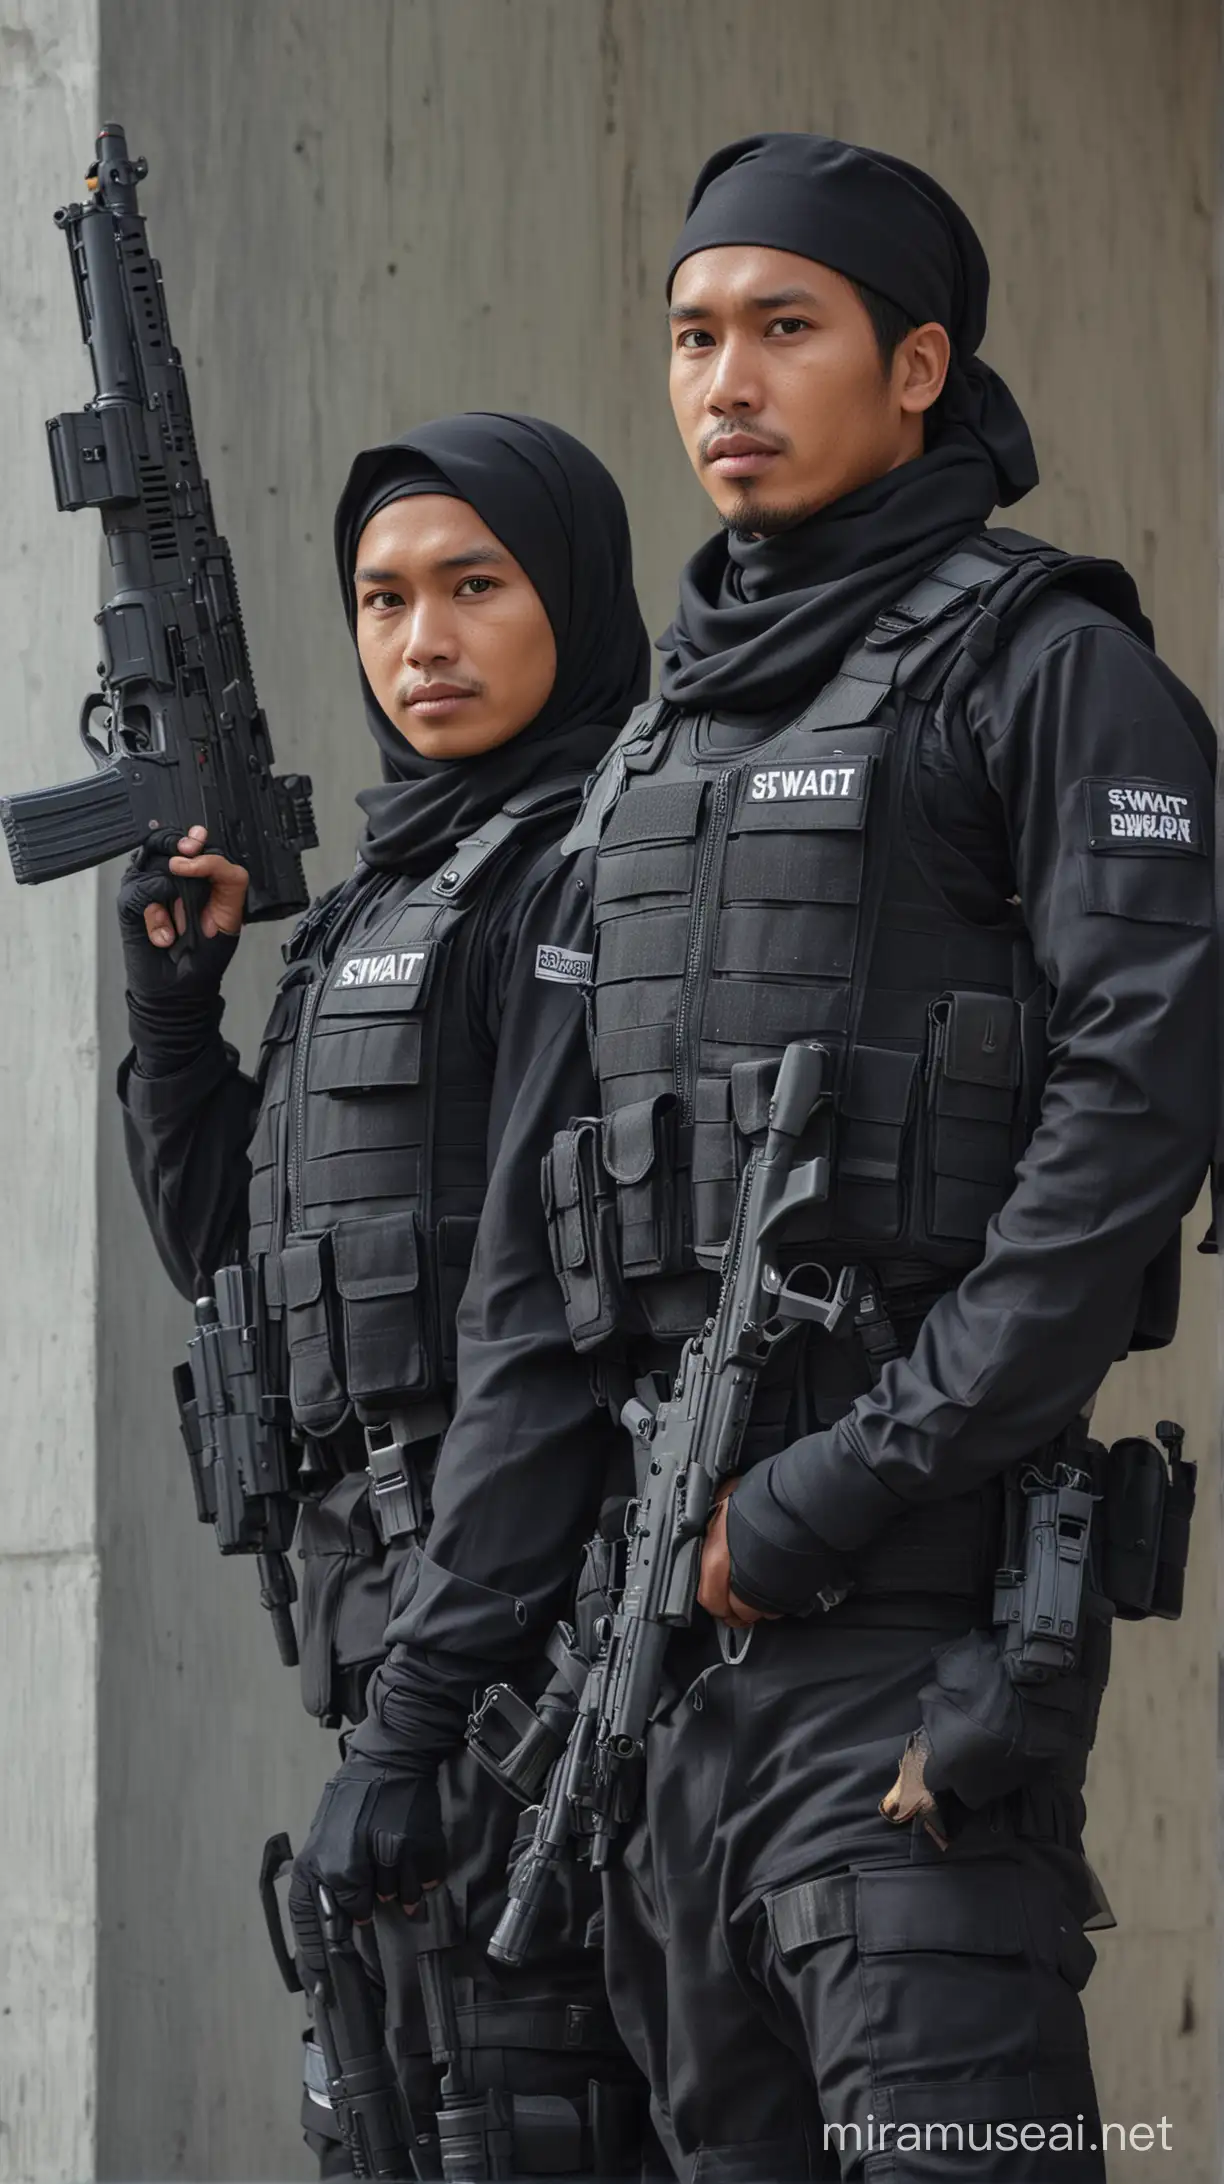 a 35 year old Indonesian man wearing a swat police uniform, holding a gun.
next to him is a 30 year old Indonesian woman wearing a swat police uniform,hijab, posing leaning against each other. empty building background. realistic 4k